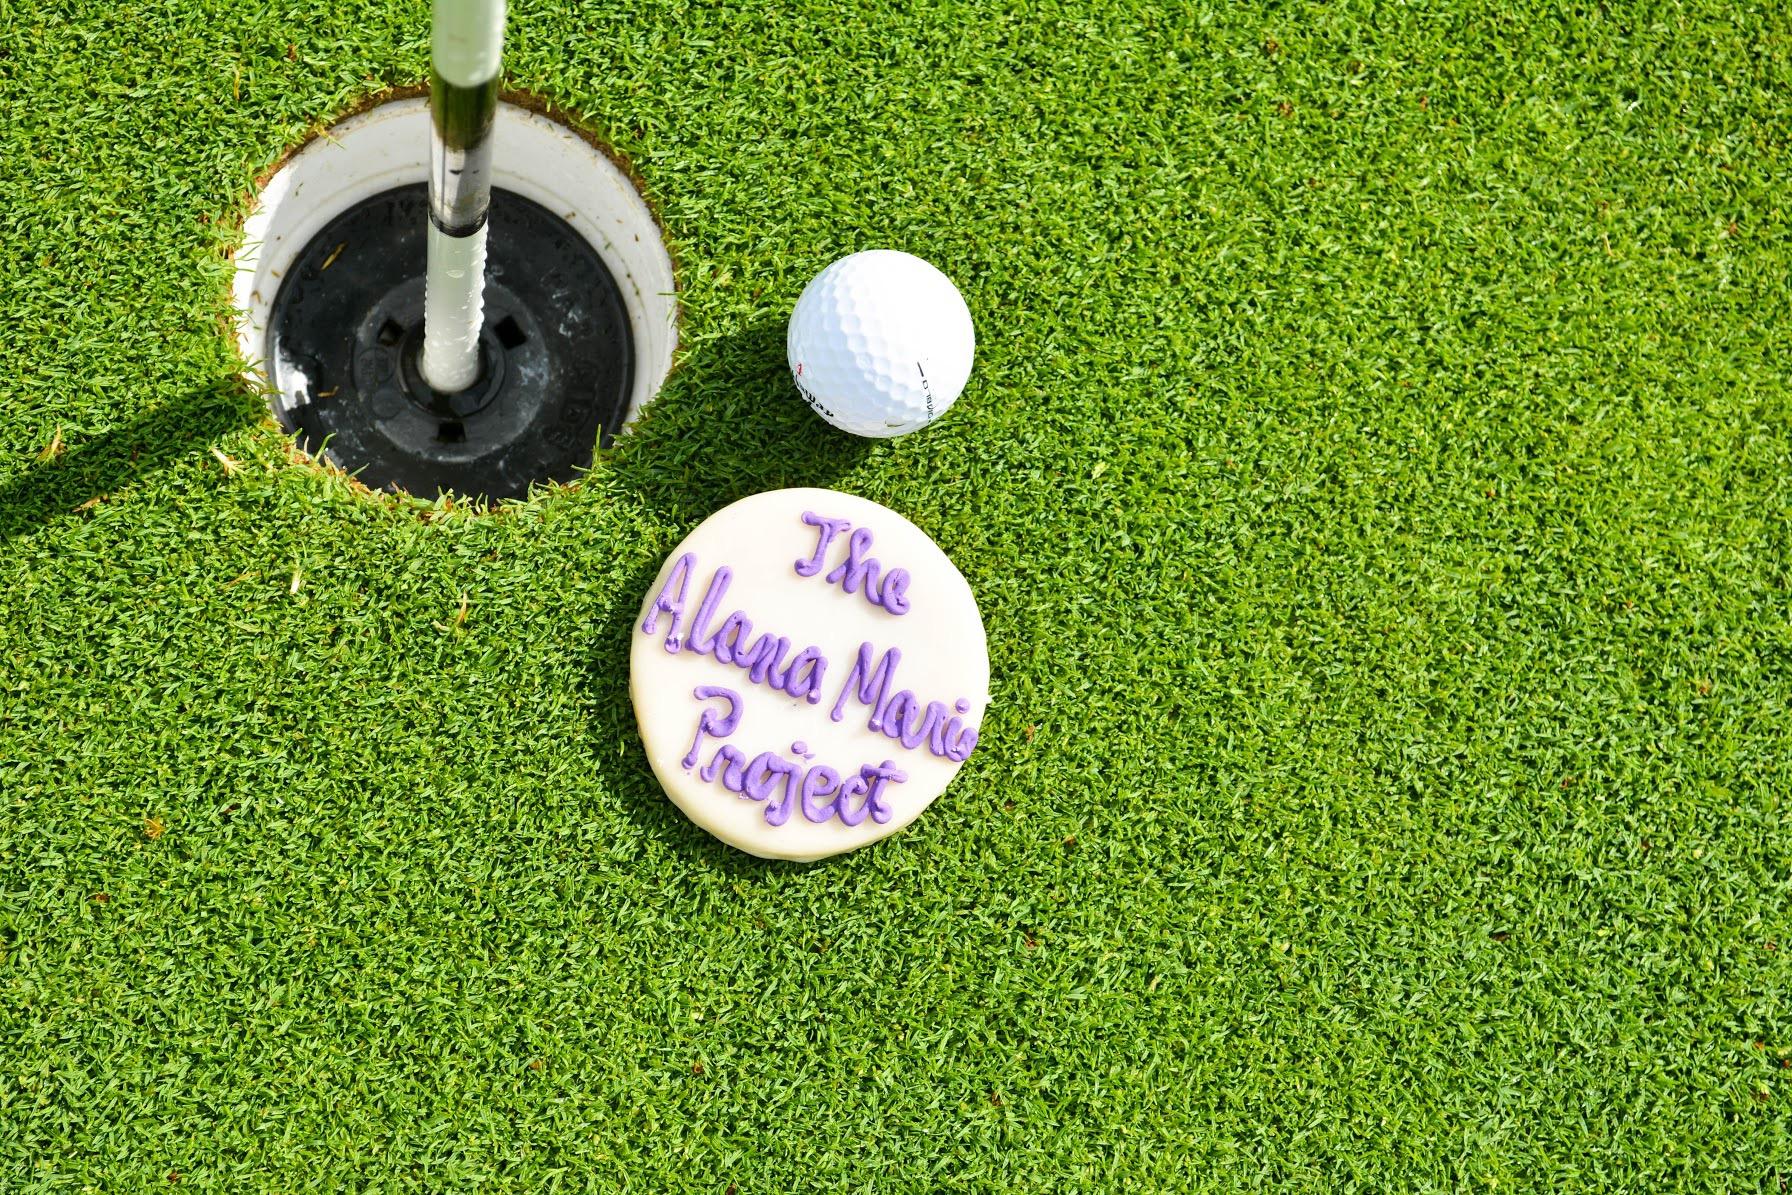 The Alana Marie Project's 2nd Annual Golf Tournament